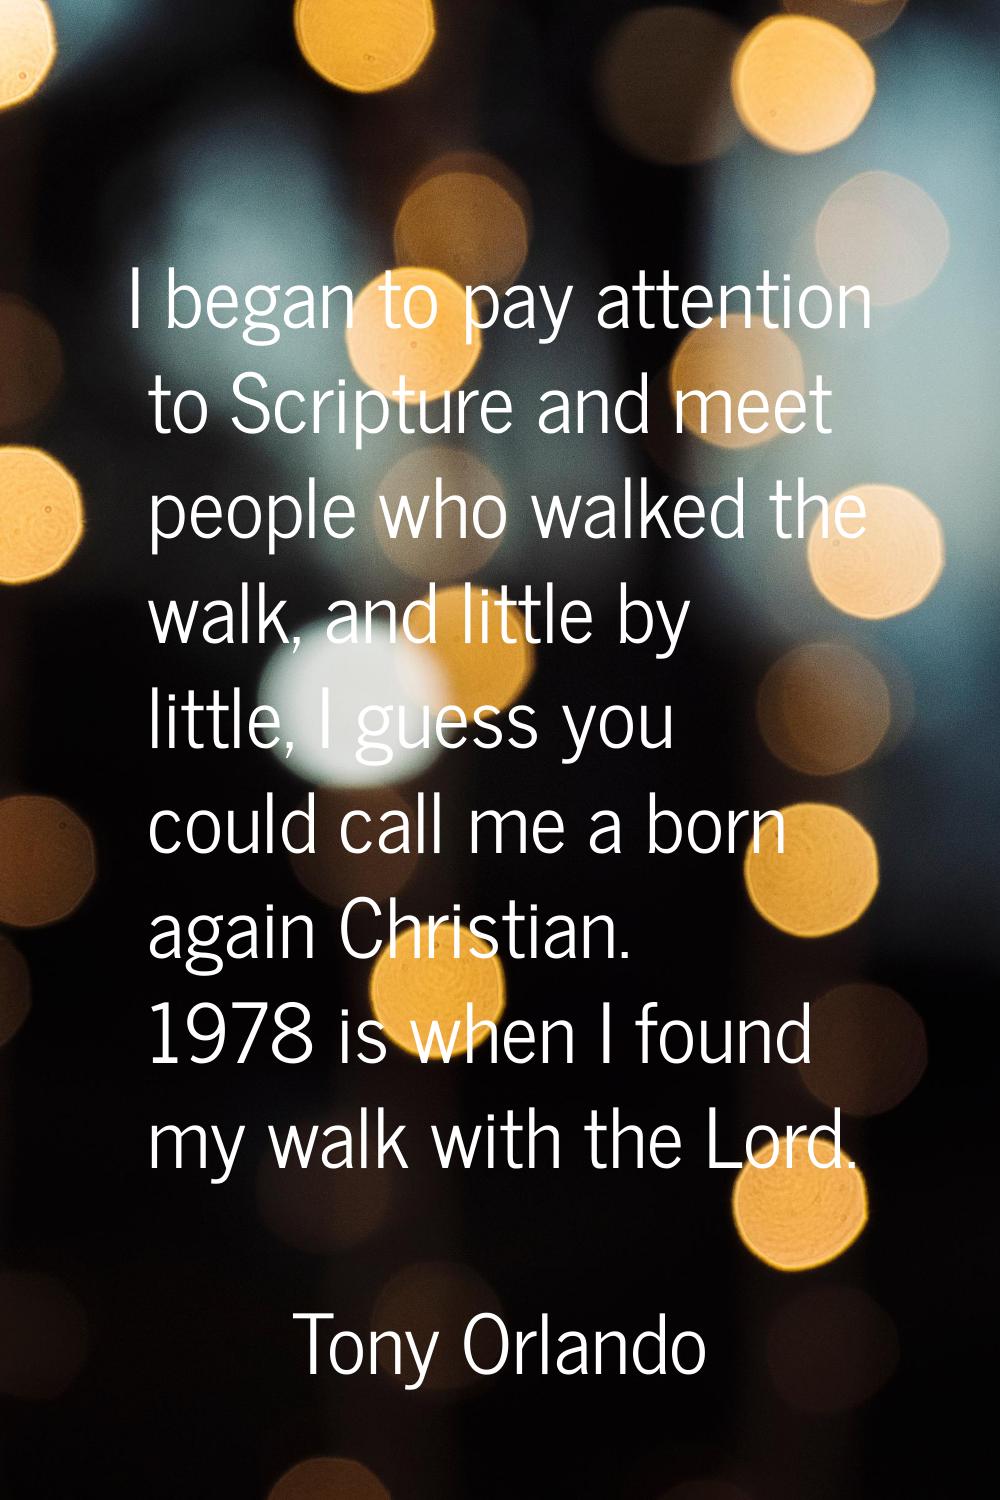 I began to pay attention to Scripture and meet people who walked the walk, and little by little, I 